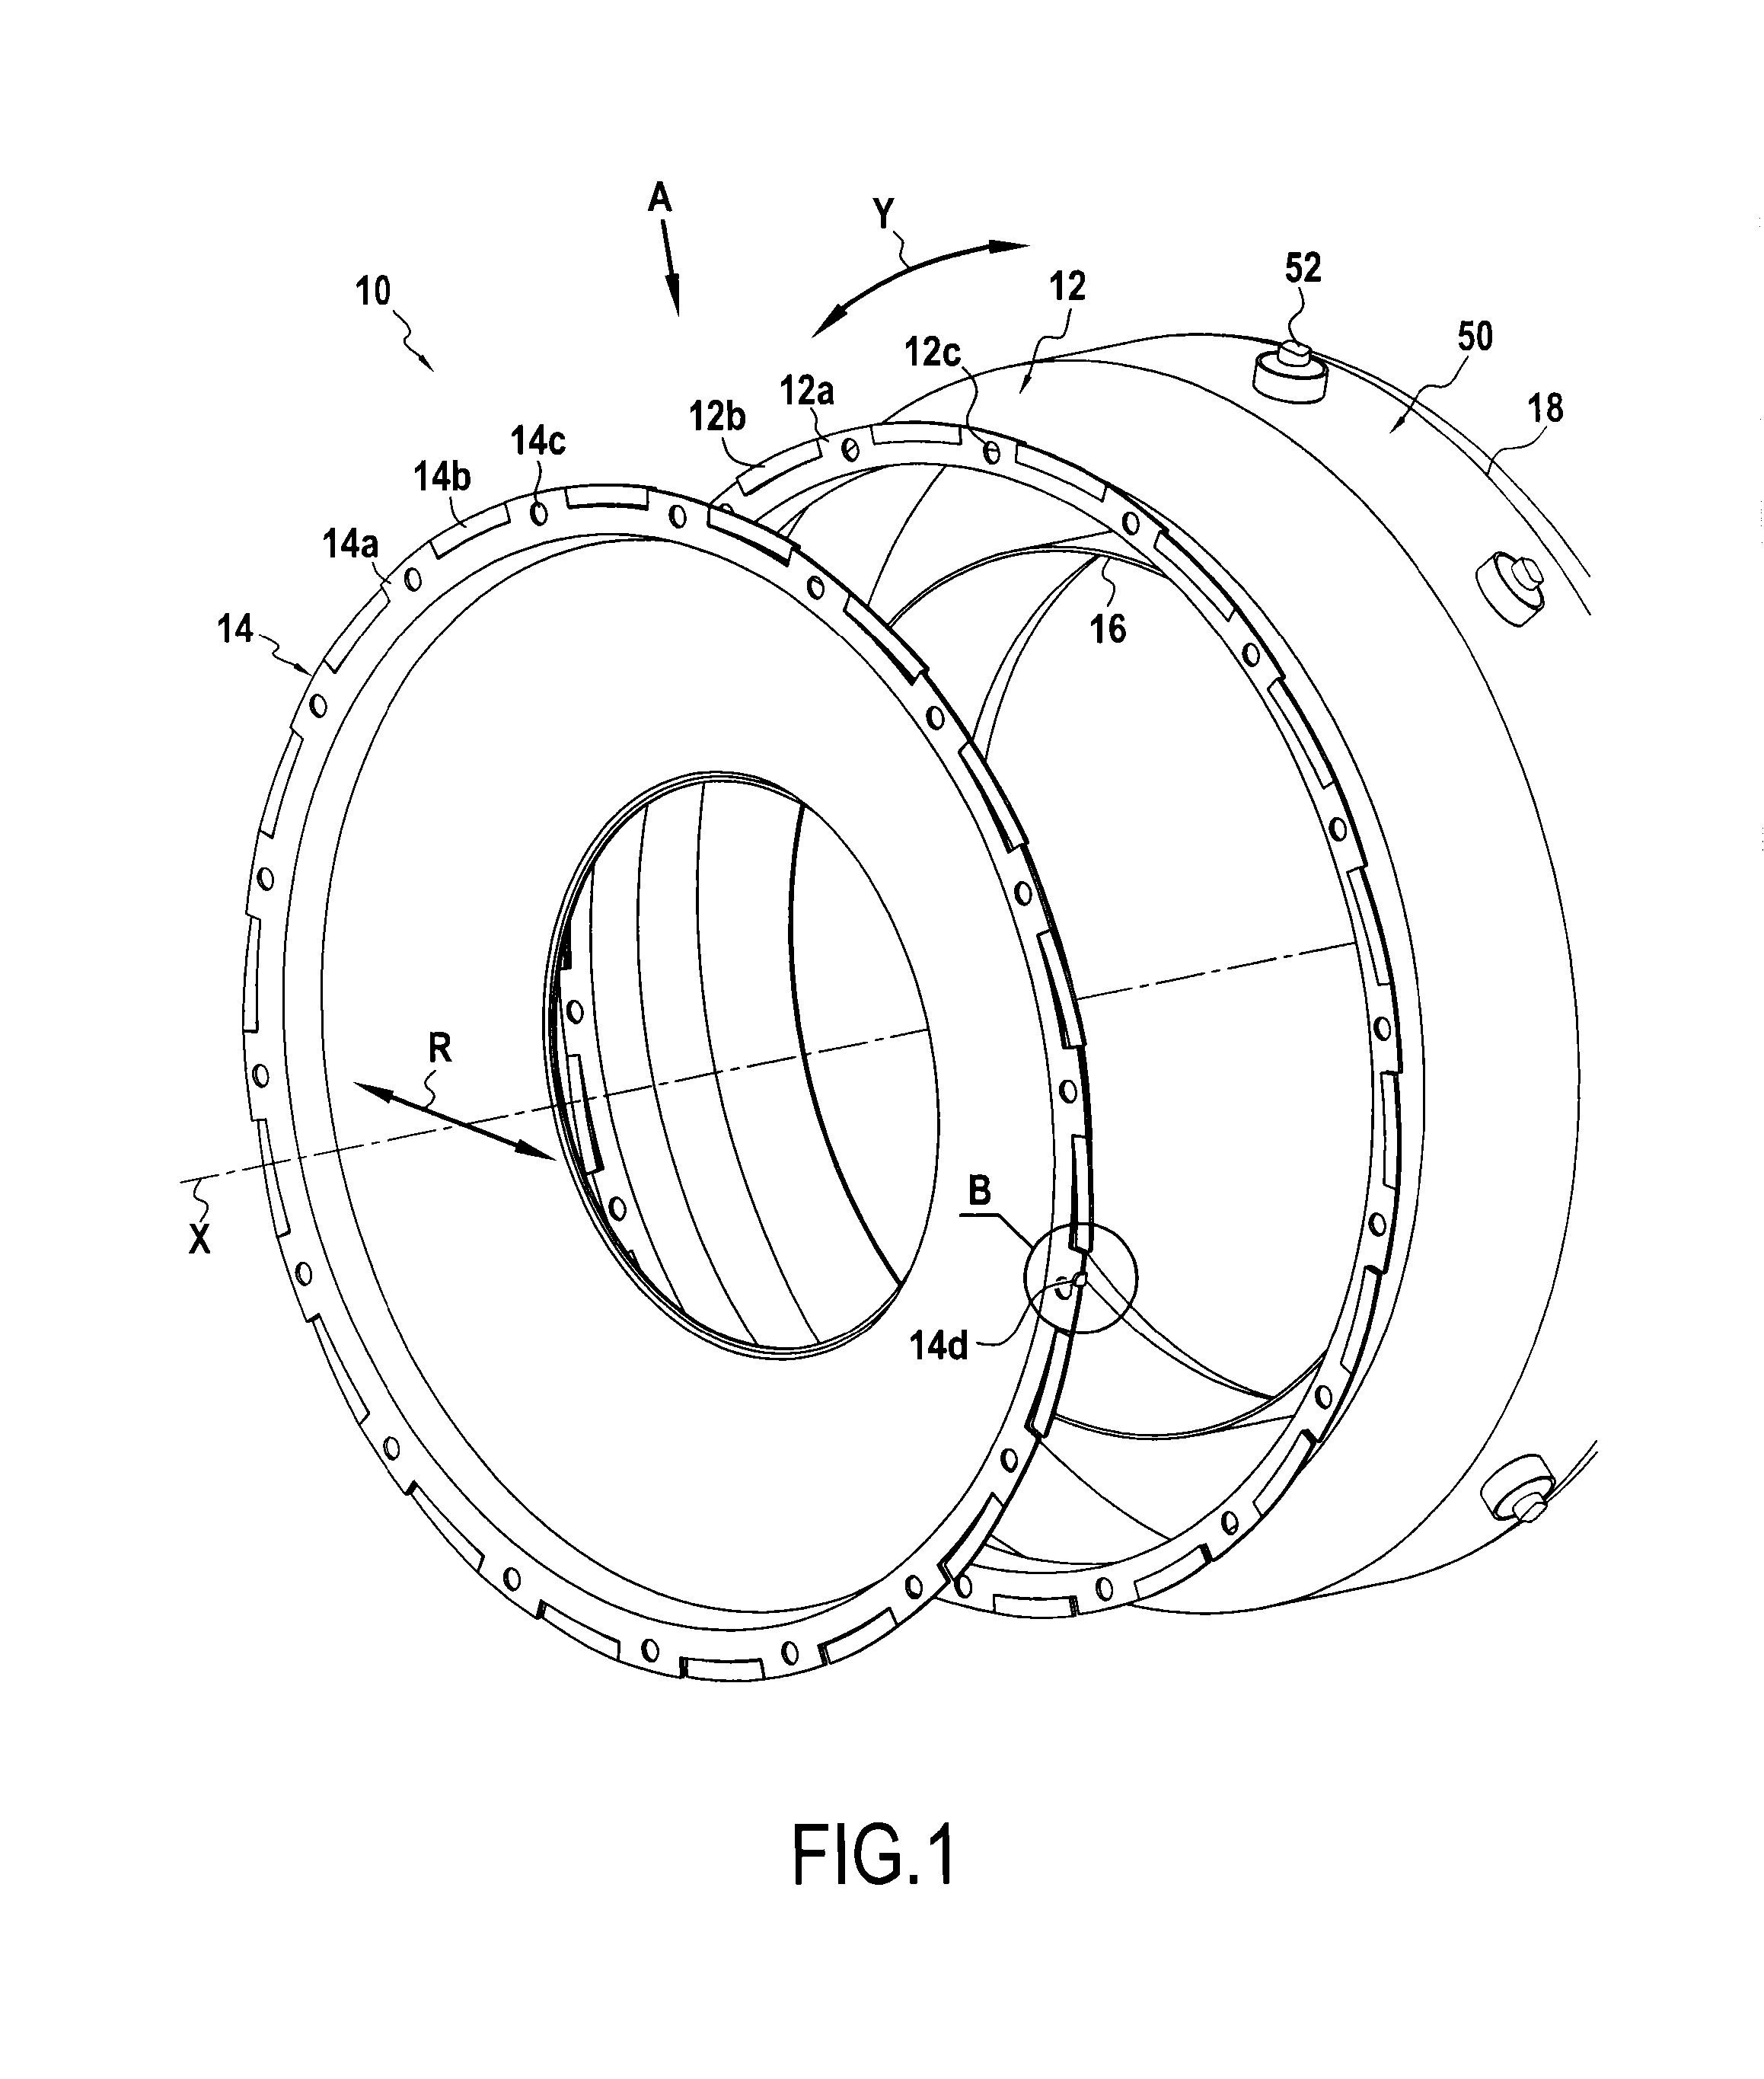 Annular combustion chamber of a turbomachine